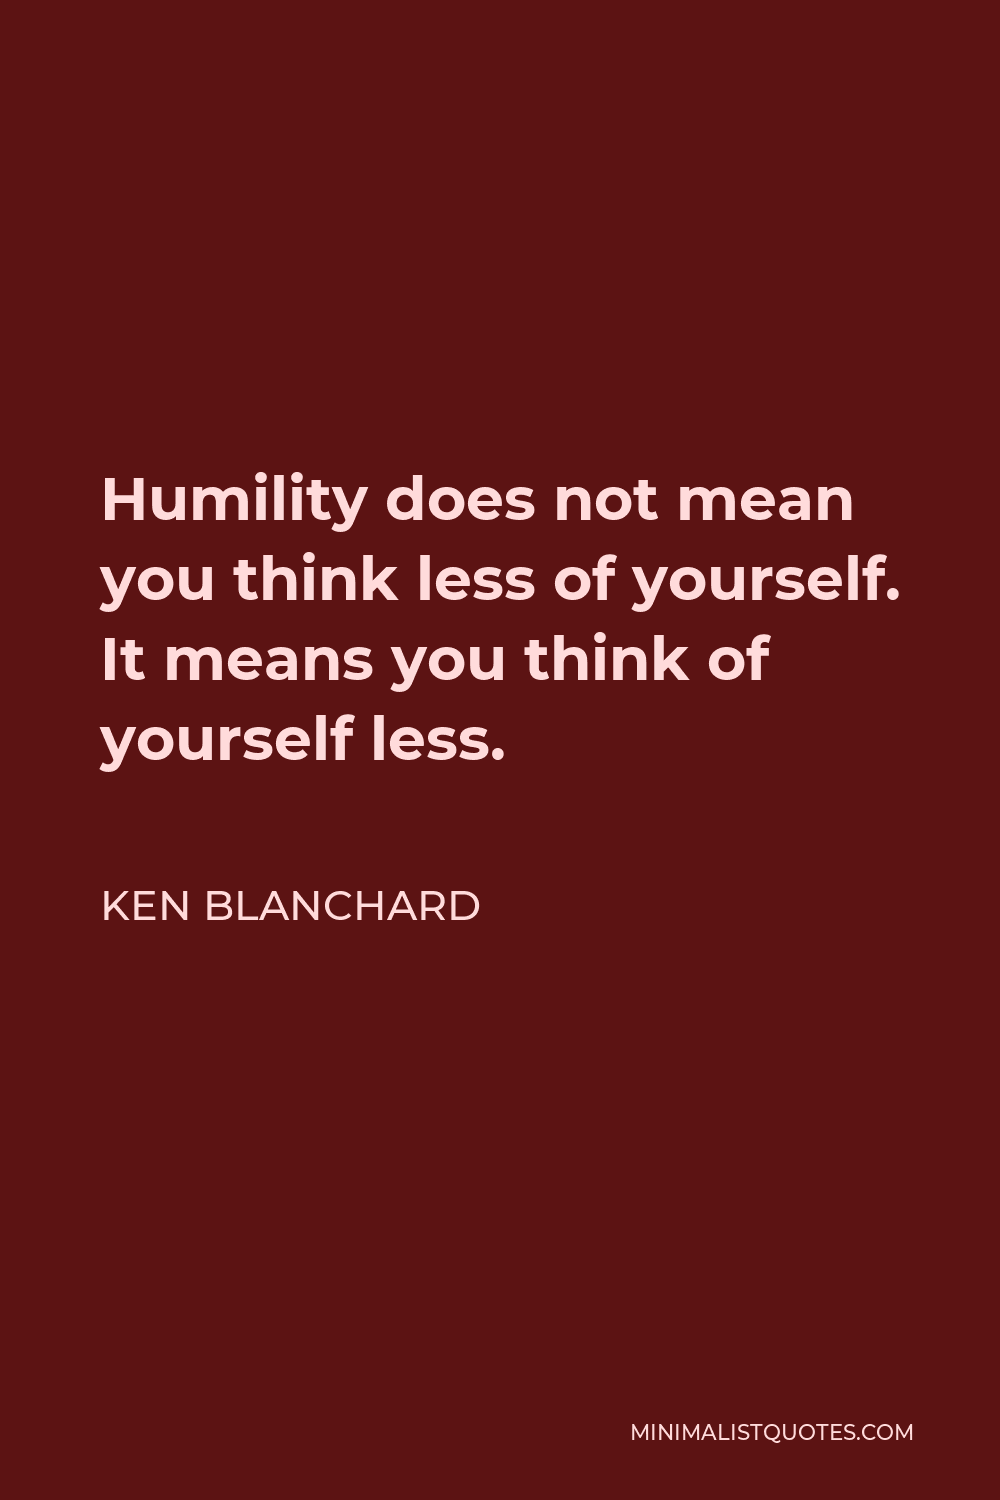 Ken Blanchard Quote - Humility does not mean you think less of yourself. It means you think of yourself less.